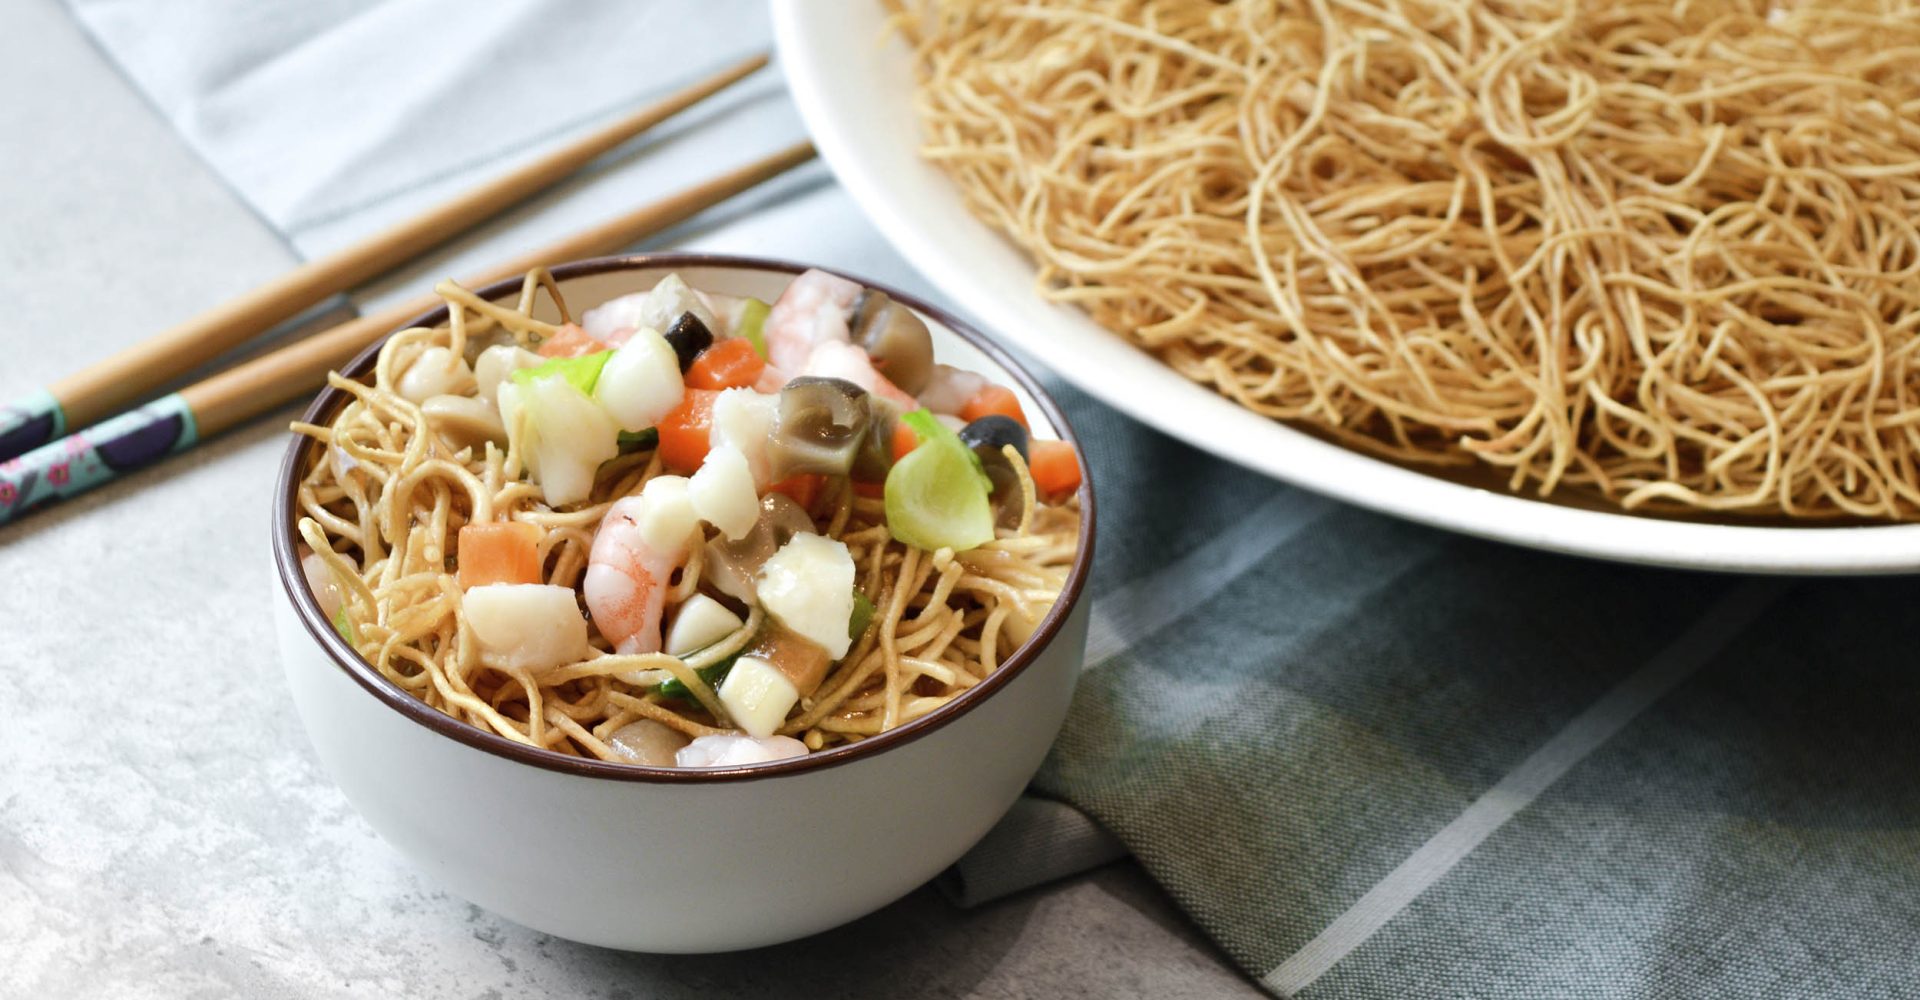 Pan-fried crispy noodles with diced seafood